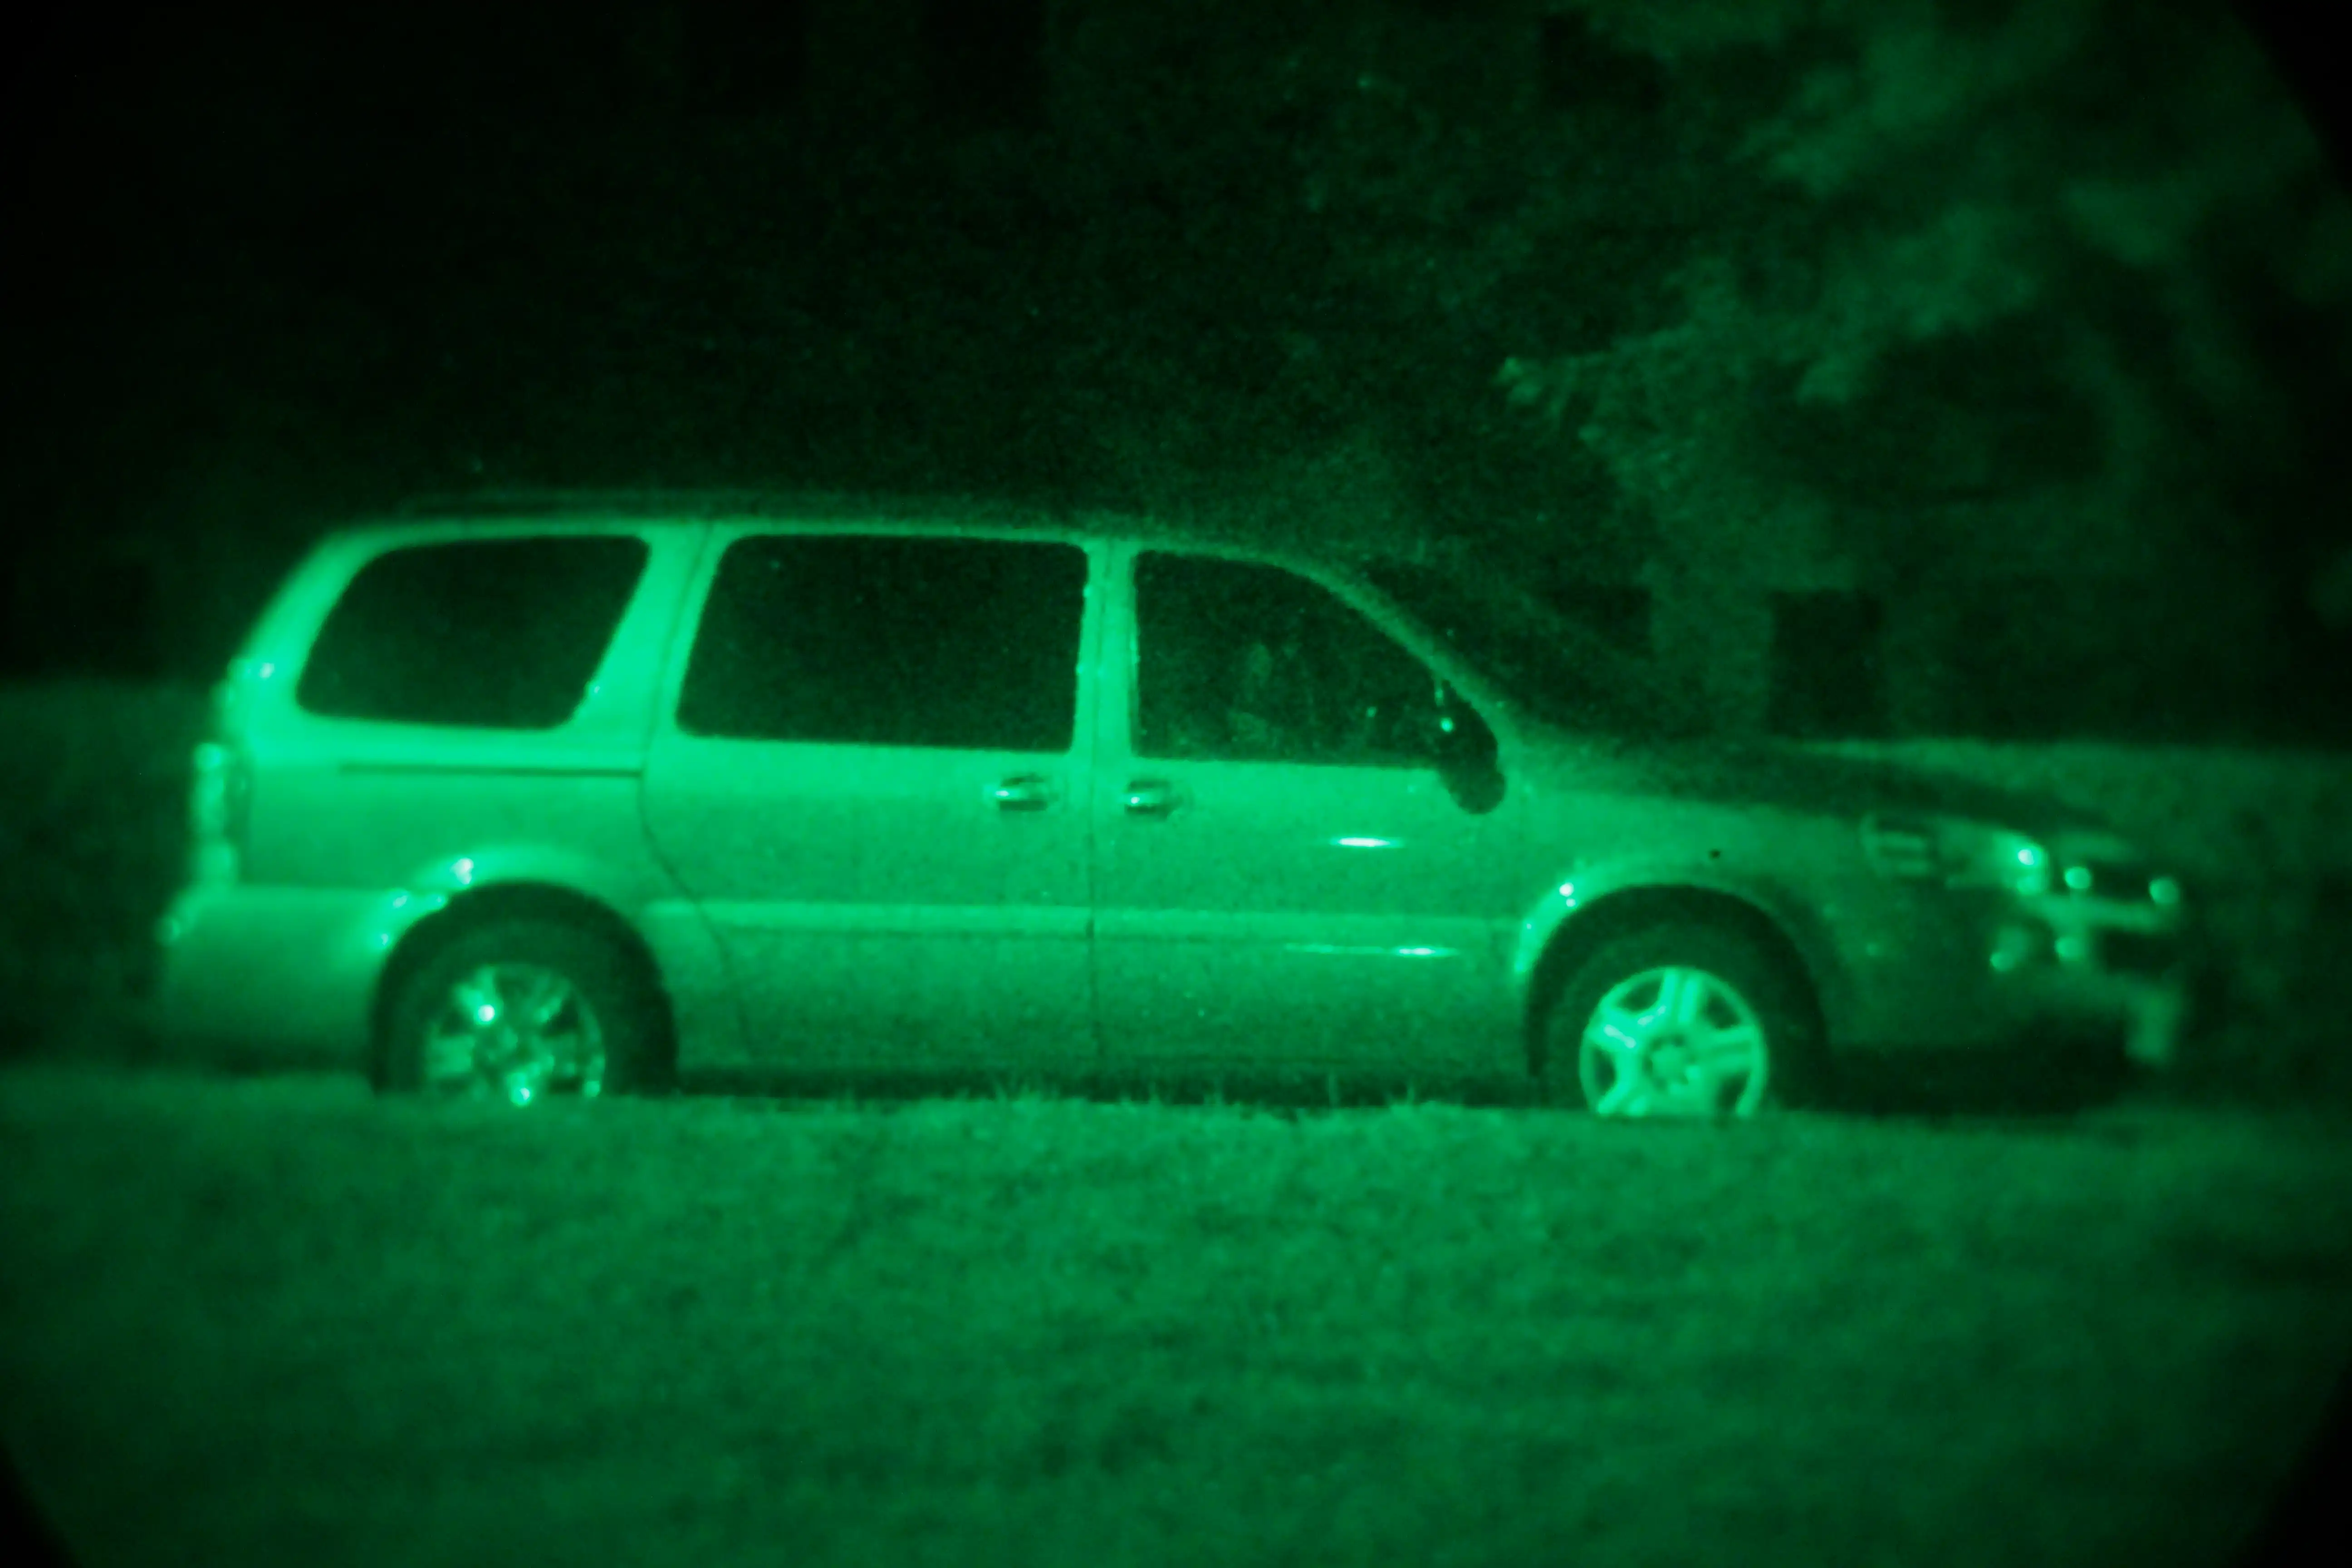 picture of a van taken at night with night vision enhancement